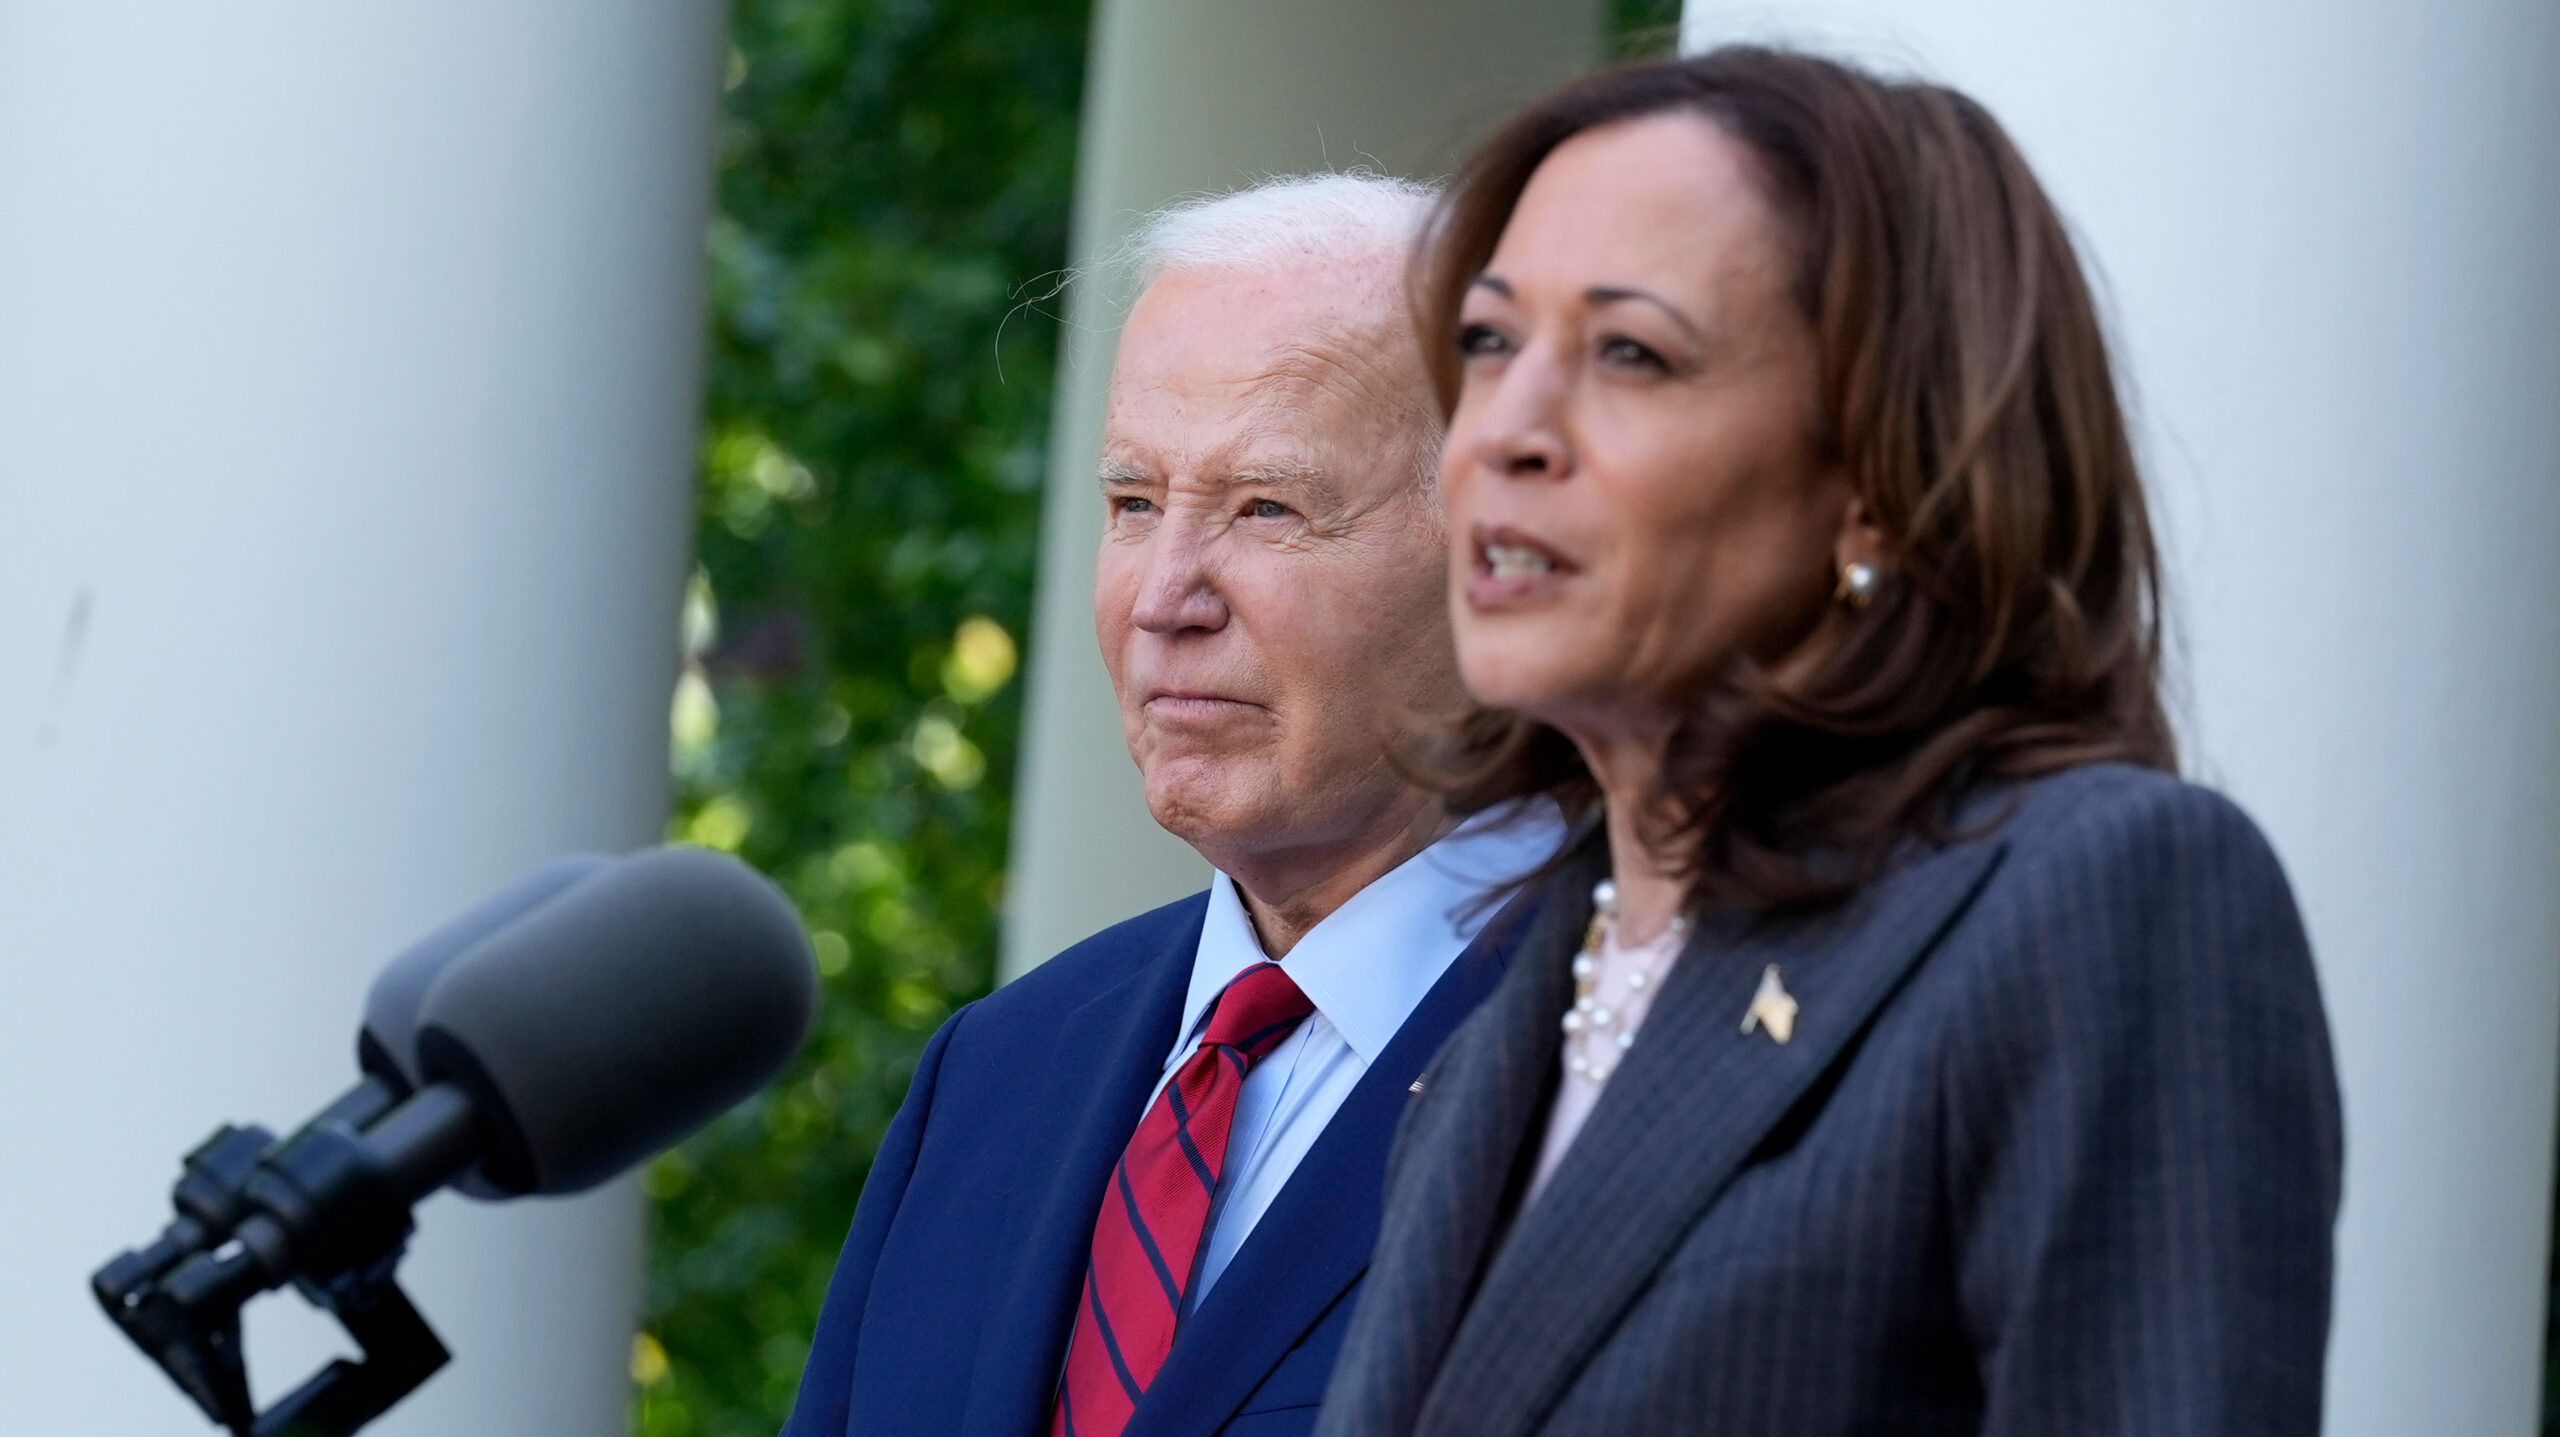 Vice President Kamala Harris speaks into a microphone outside of the White House, with a serious expression. President Joe Biden is to her side and slightly behind her, also looking serious.